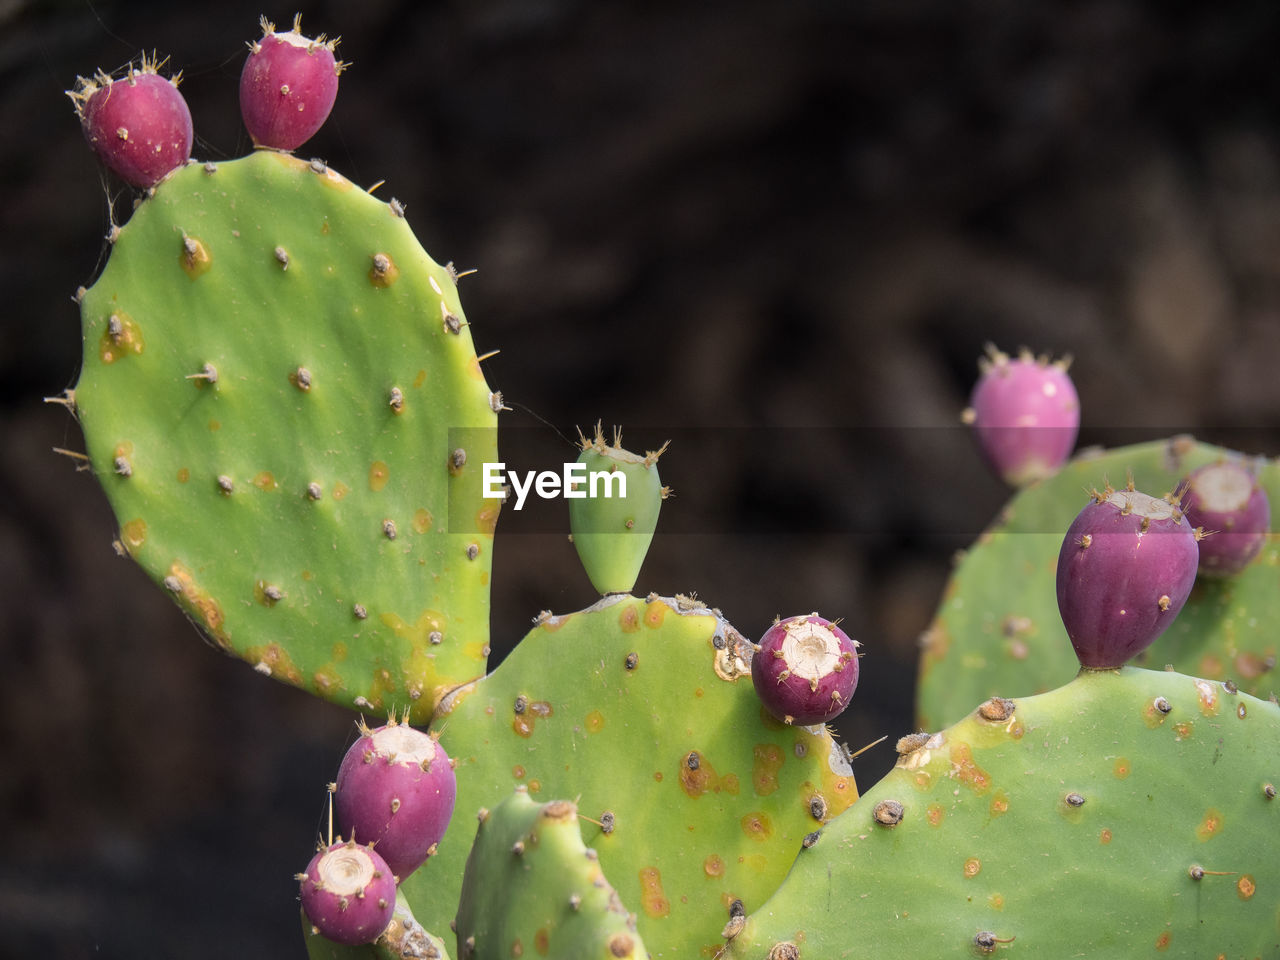 CLOSE-UP OF PRICKLY PEAR CACTUS ON PLANT